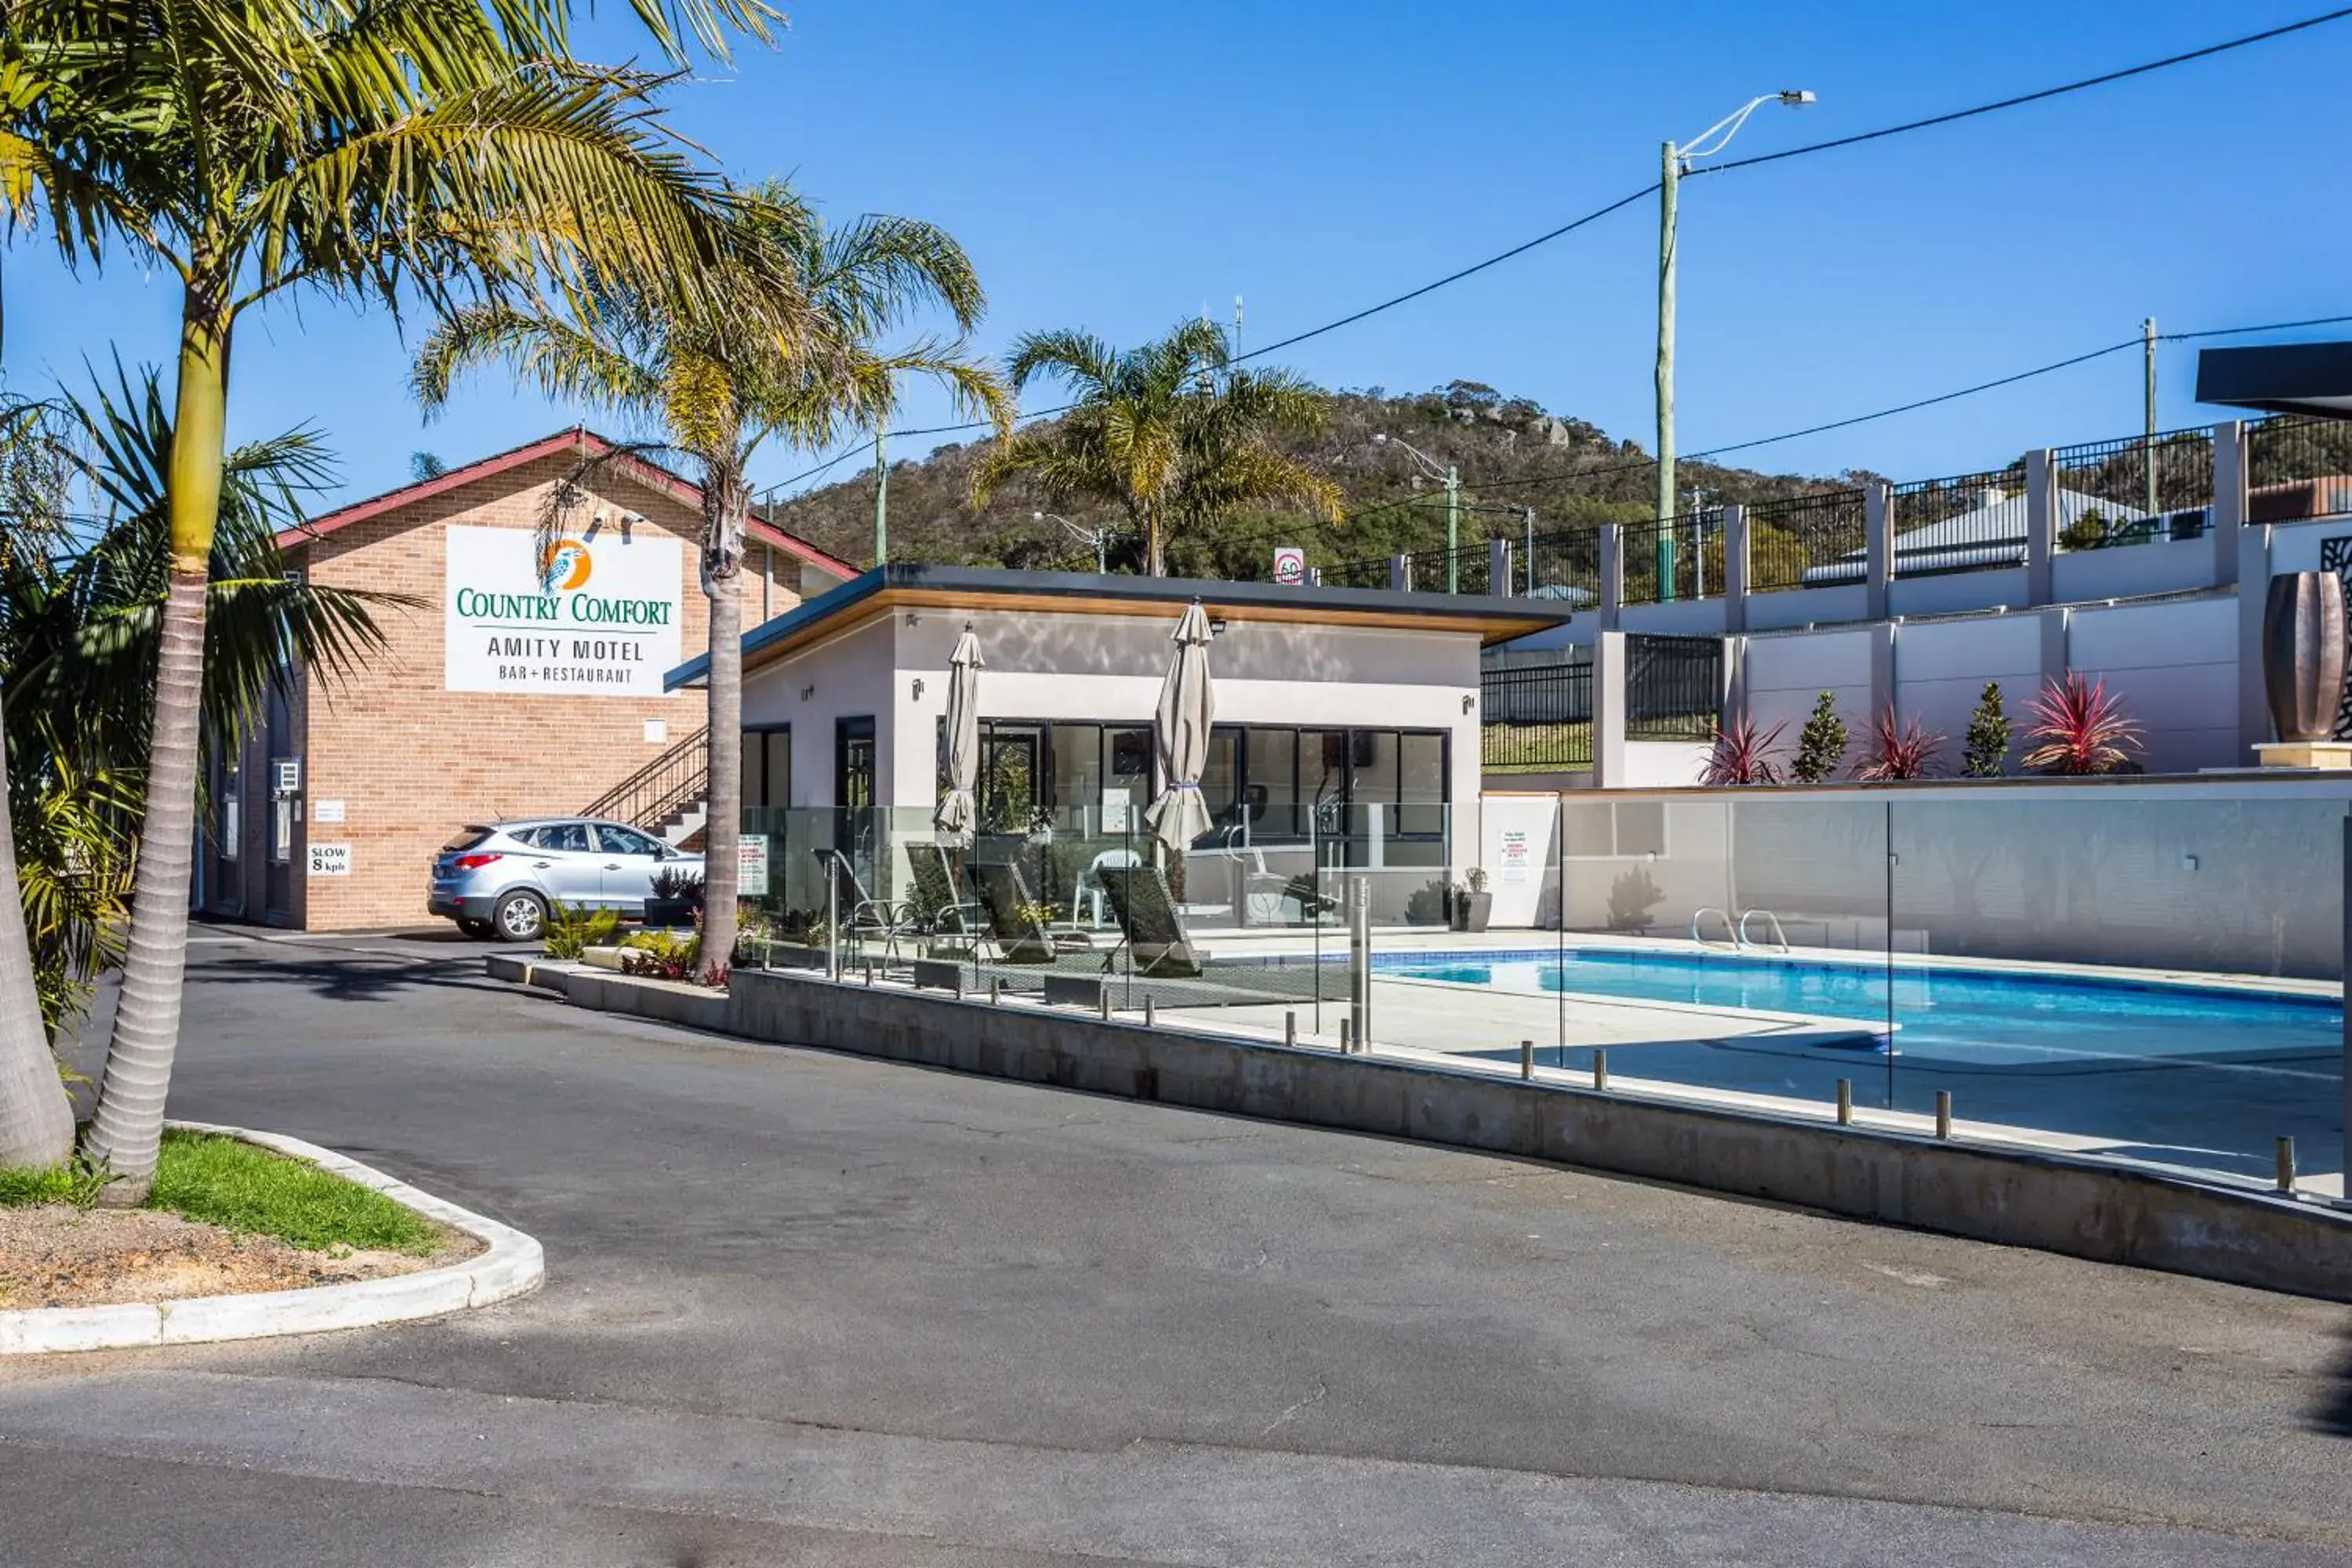 Swimming pool, Property Building in Country Comfort Amity Motel